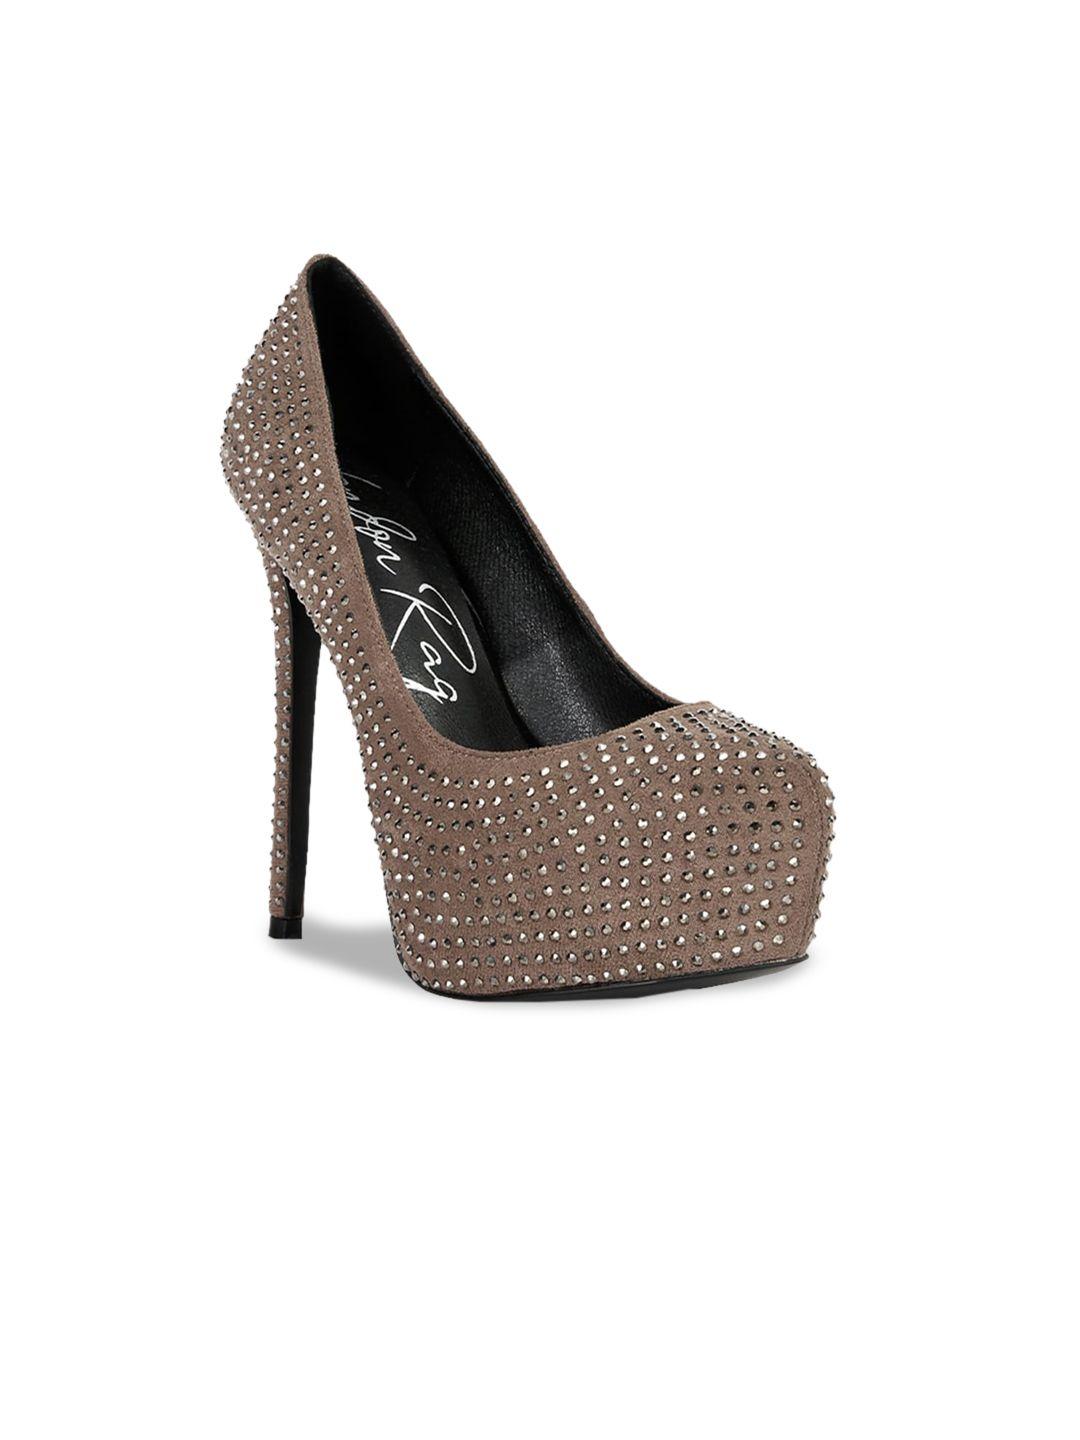 london rag taupe embellished suede party stiletto pumps